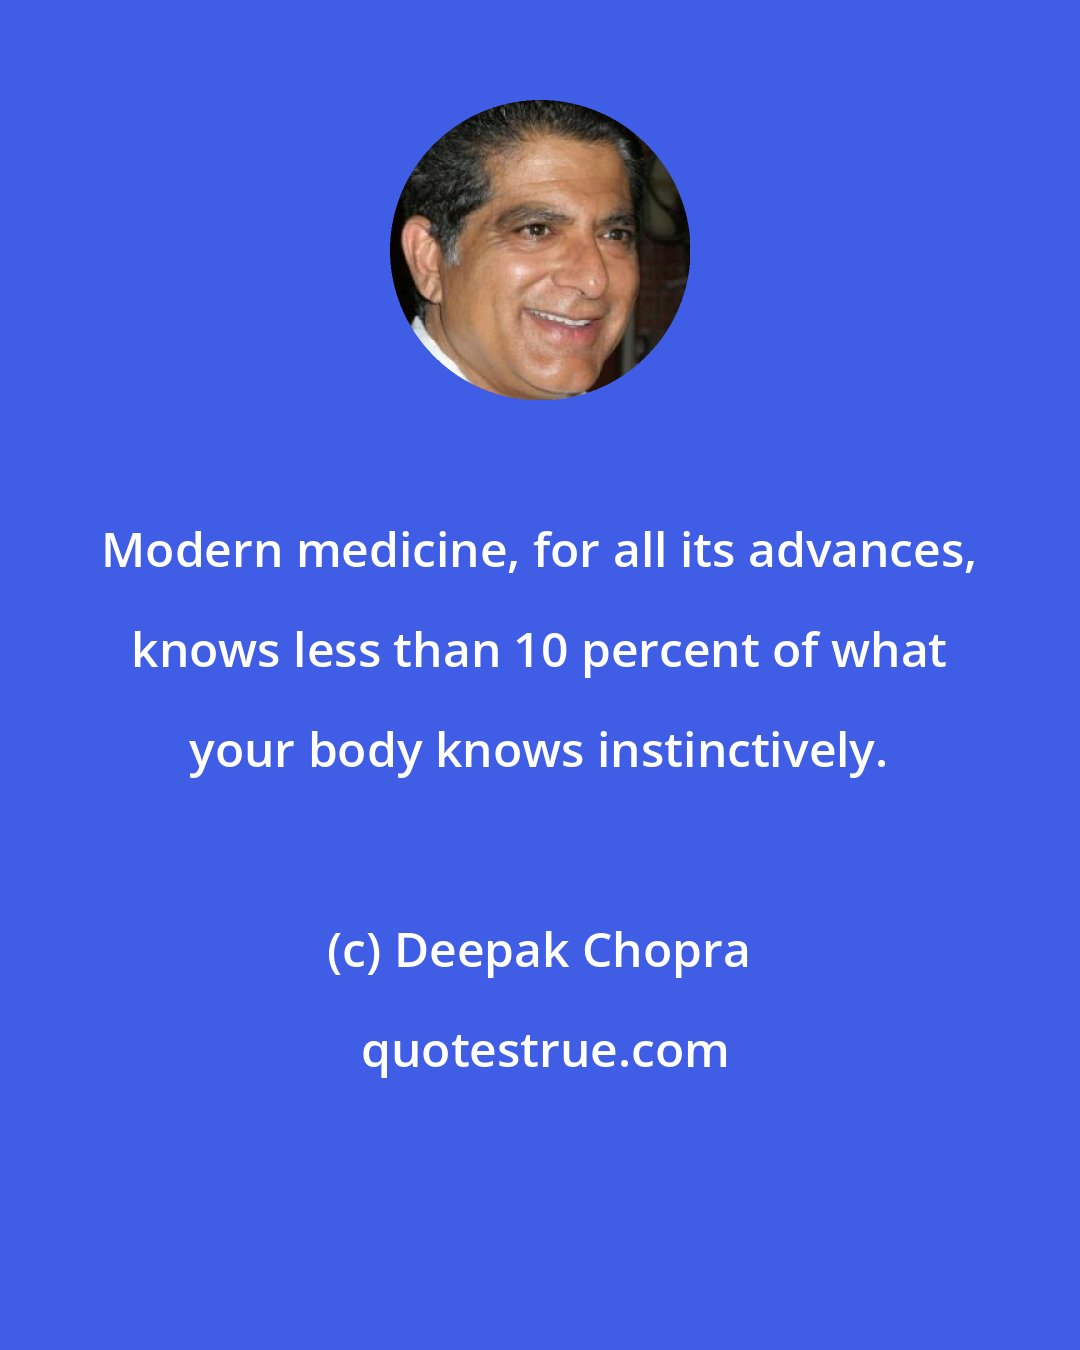 Deepak Chopra: Modern medicine, for all its advances, knows less than 10 percent of what your body knows instinctively.